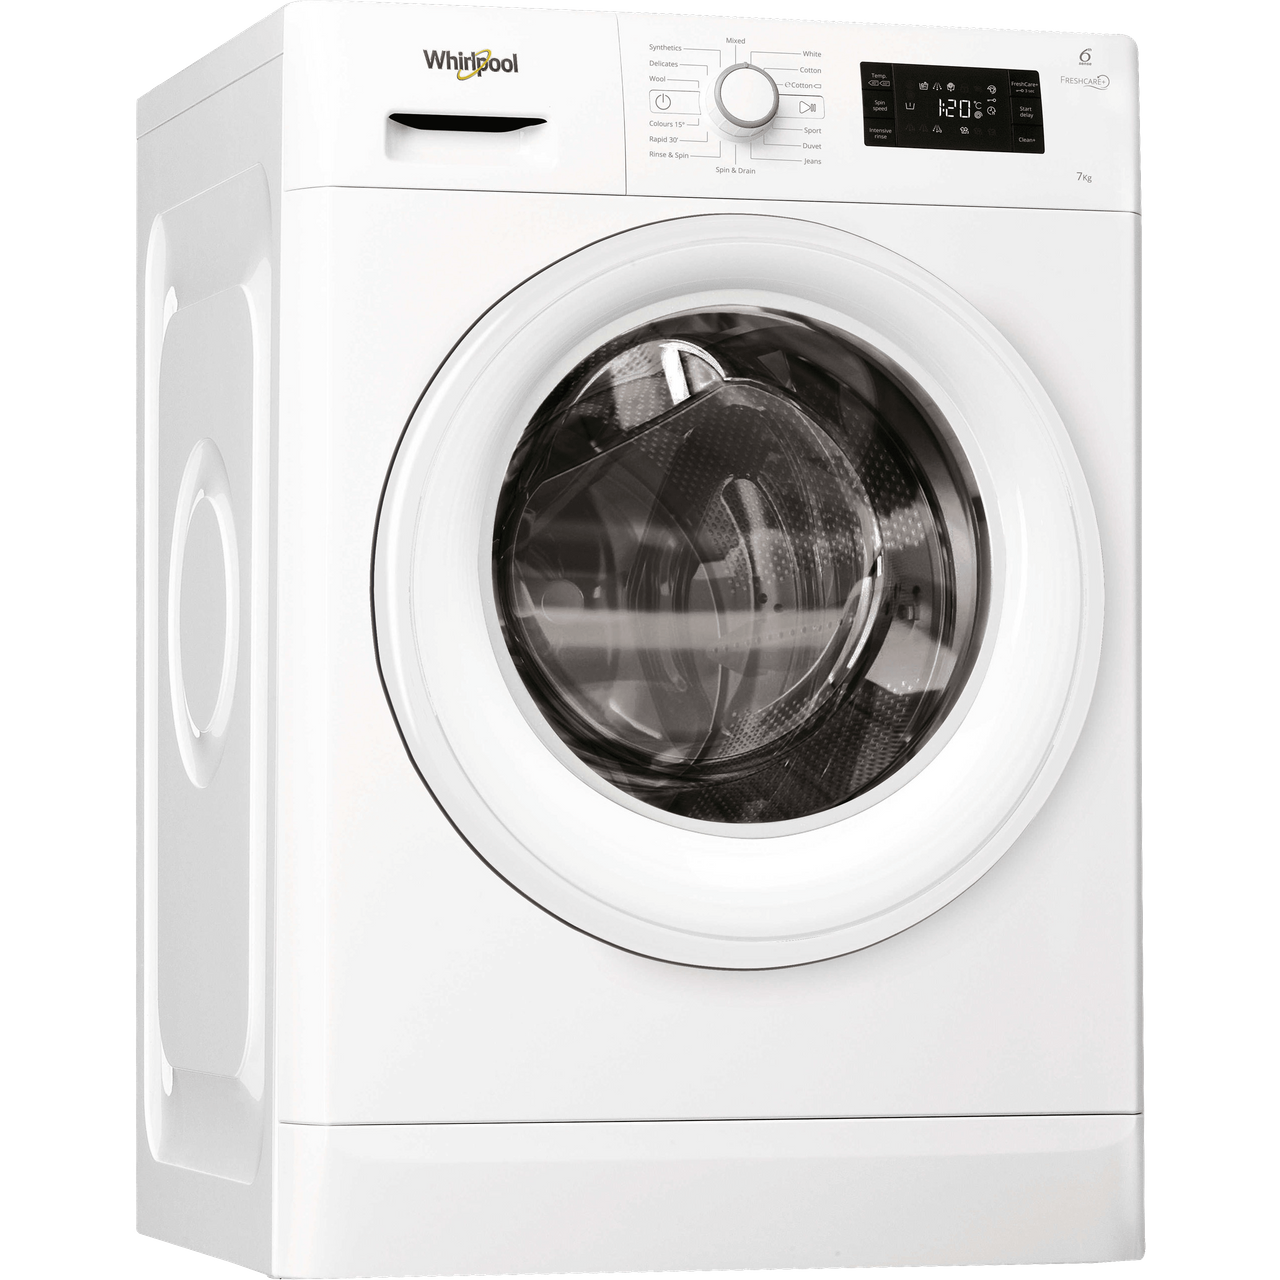 Whirlpool FWG71484W 7Kg Washing Machine with 1400 rpm Review